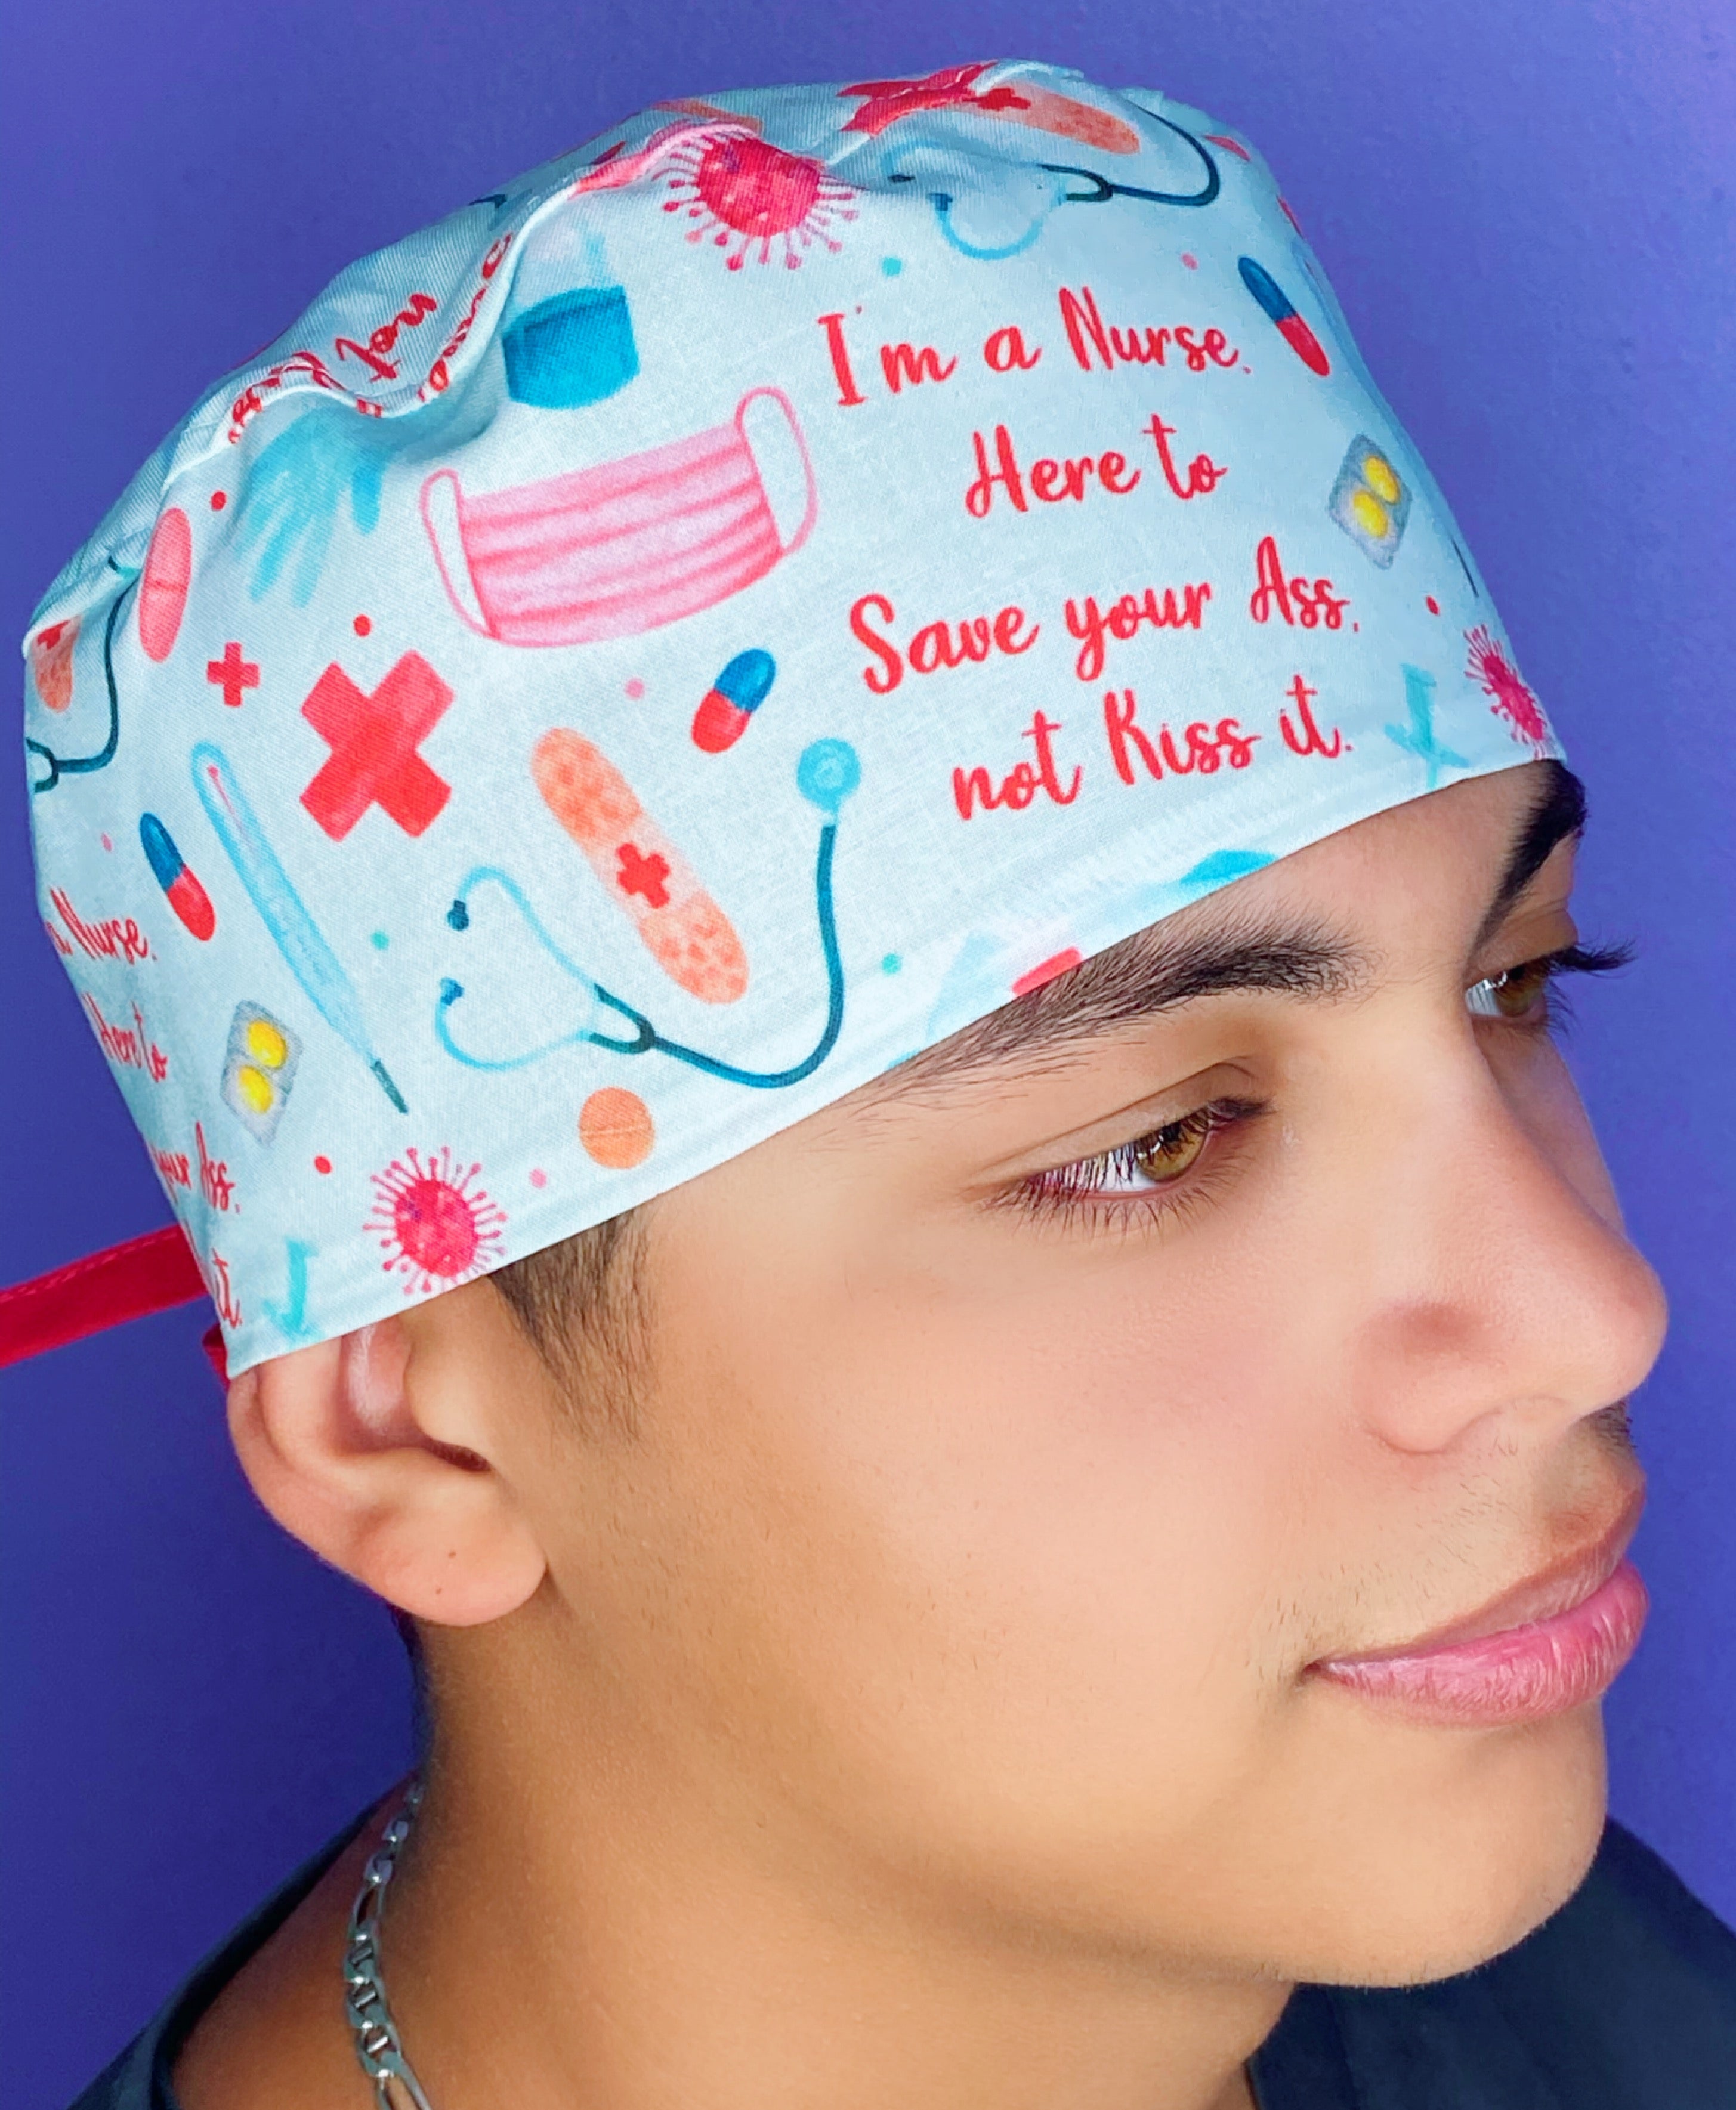 I Am A Nurse, Here To Save Your Ass NOT Kiss It Funny Unisex Medical Theme Scrub Cap